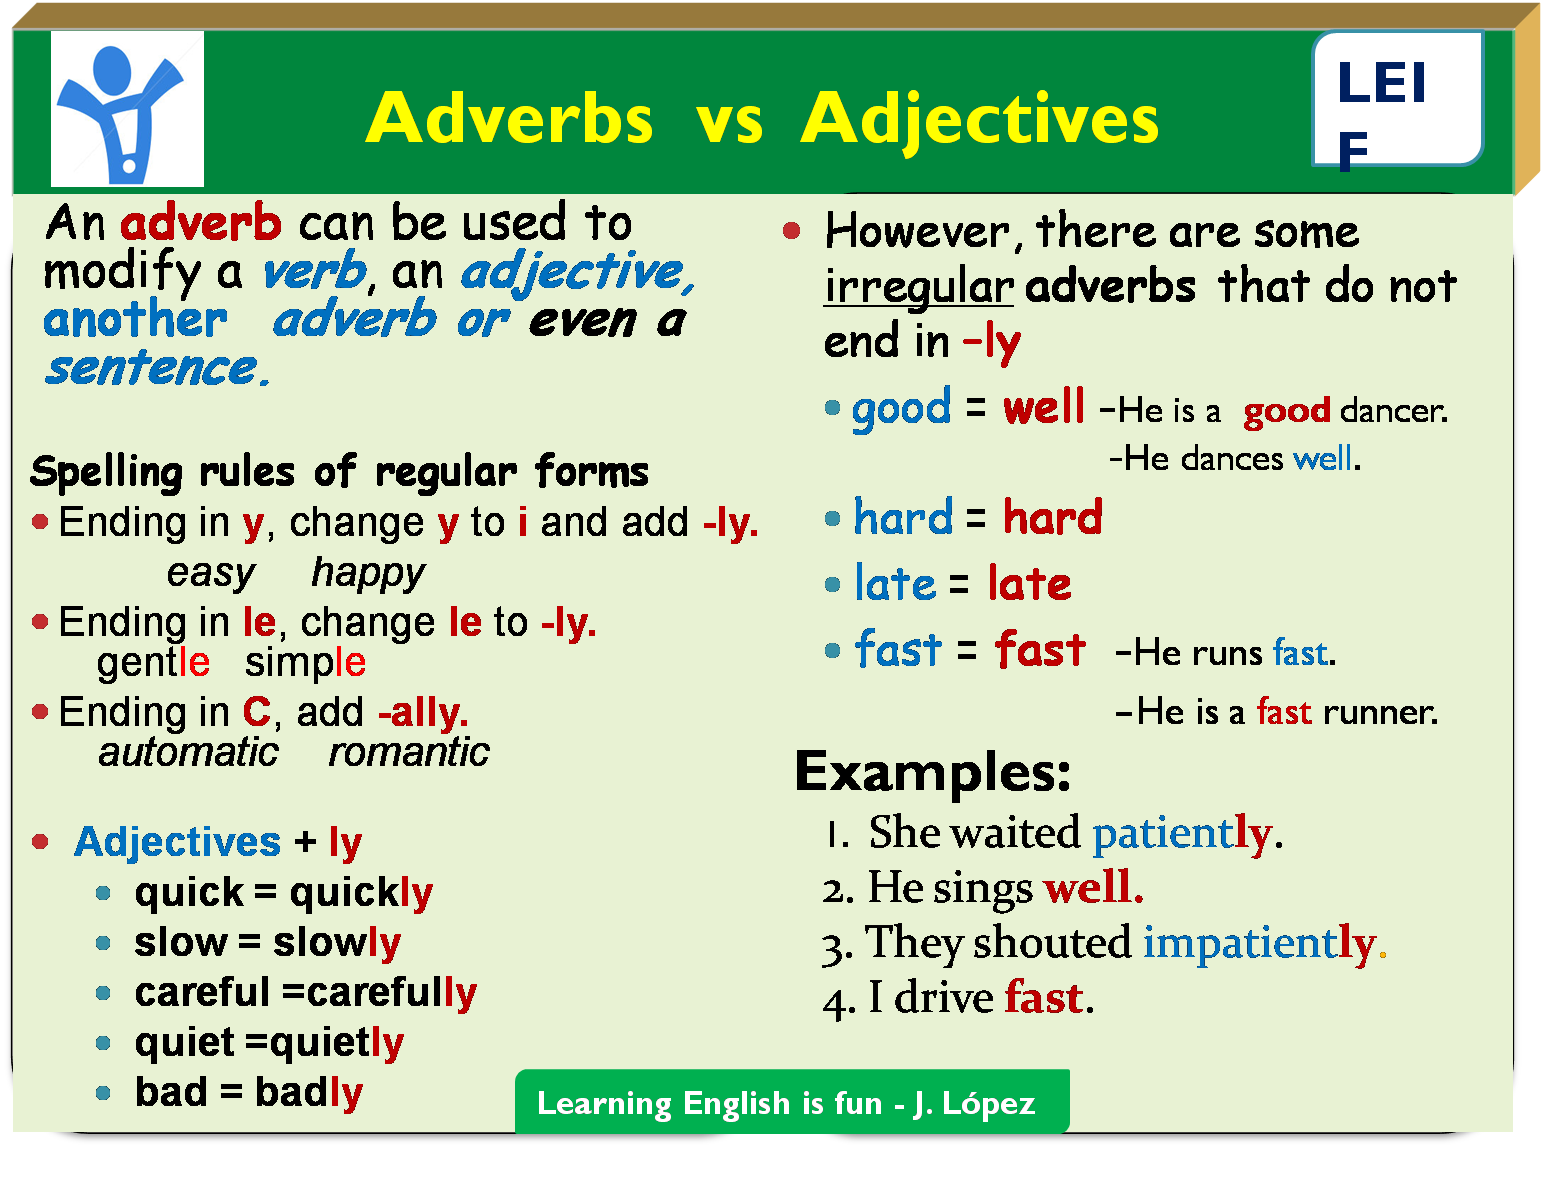 intensifiers-are-adverbs-that-make-the-meaning-of-the-verb-it-is-modifying-stronger-depending